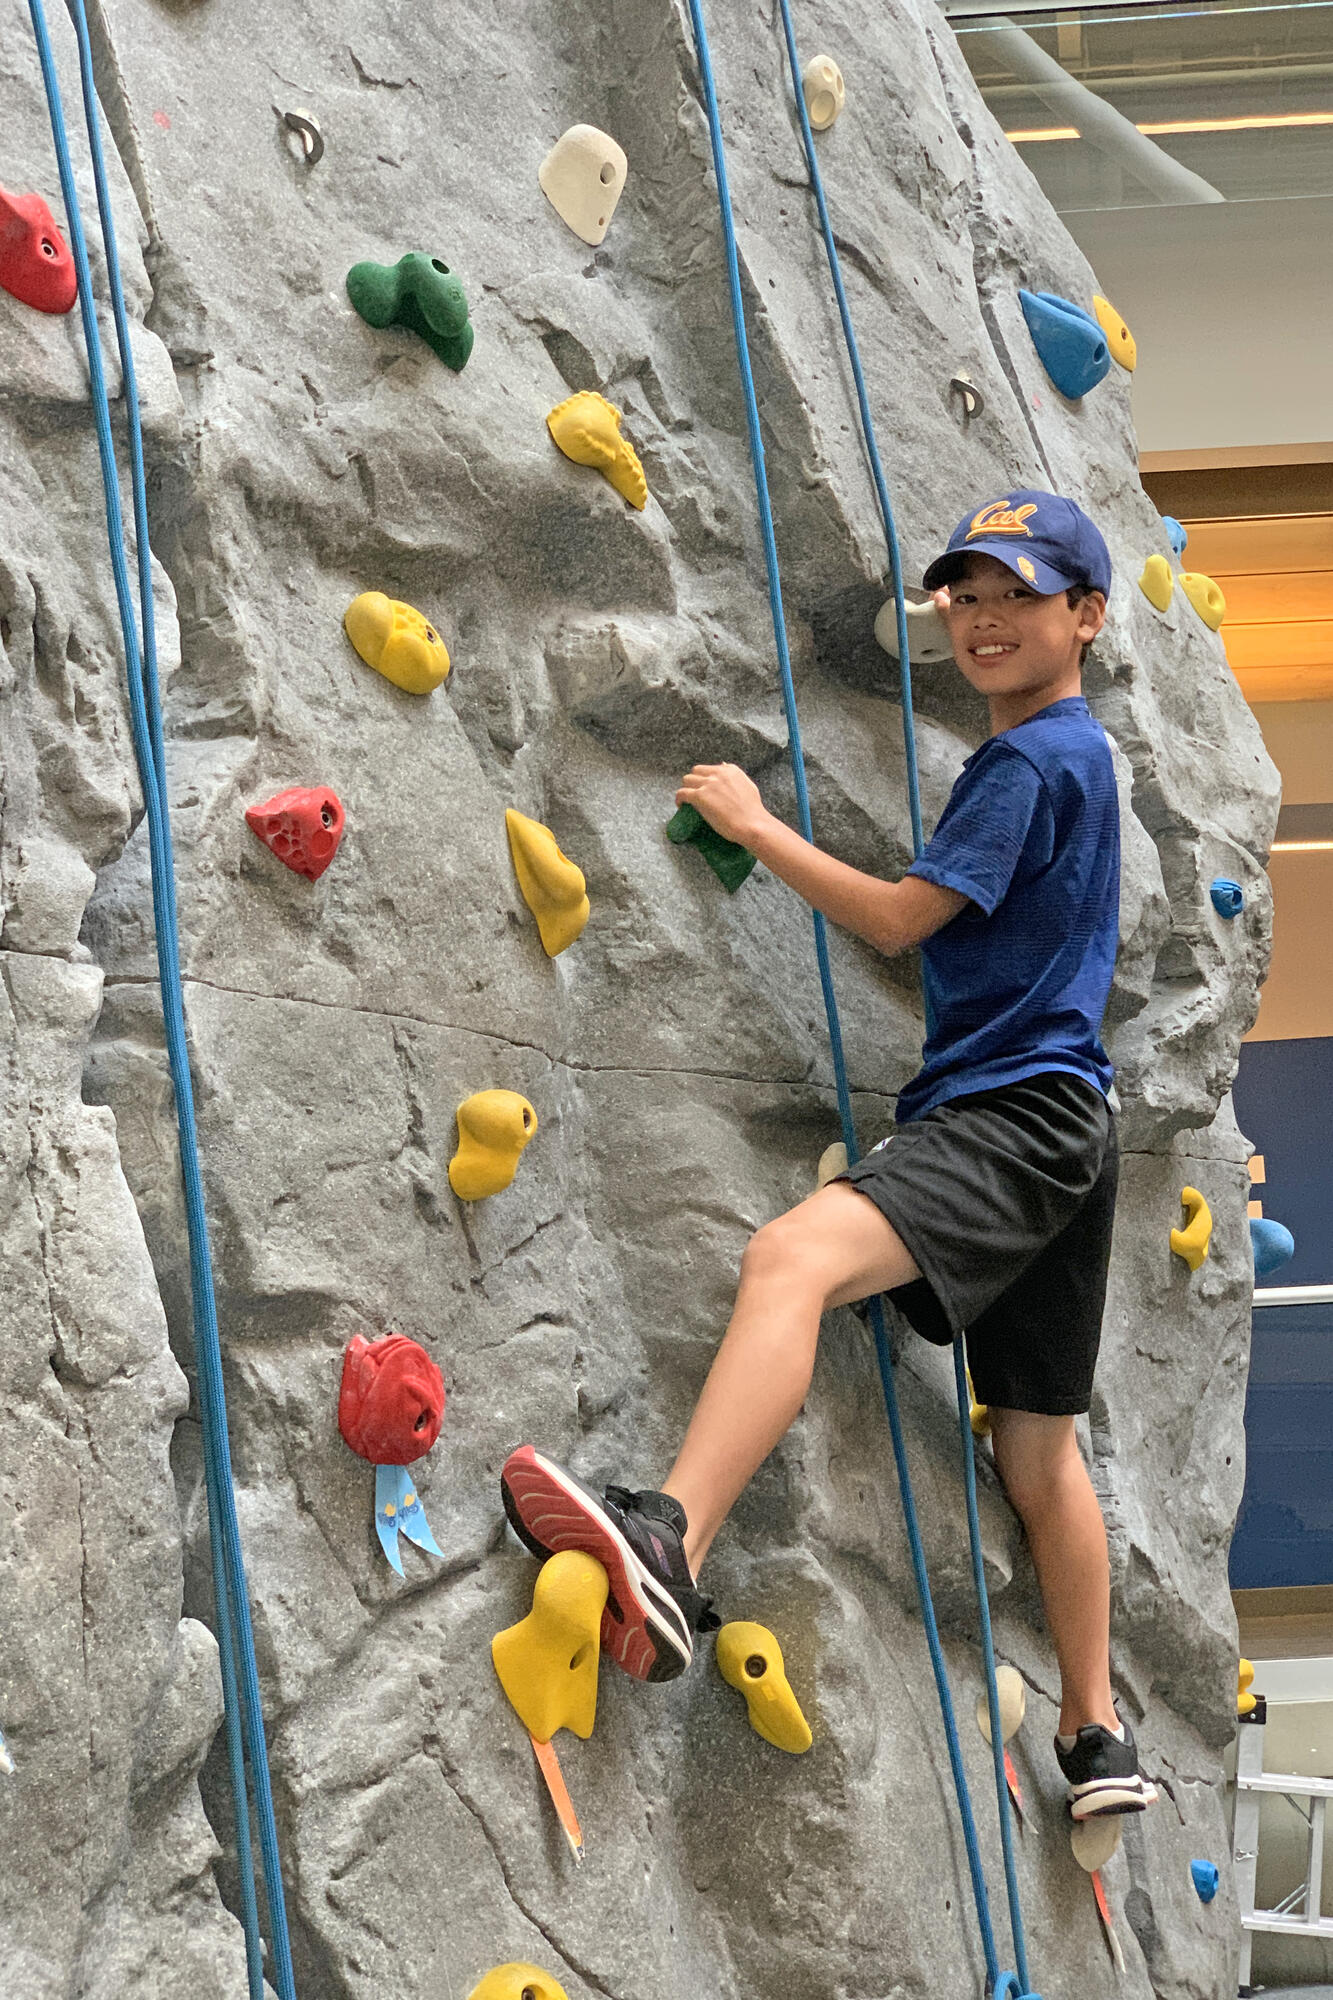 A student smiles for a photo while indoor rock climbing